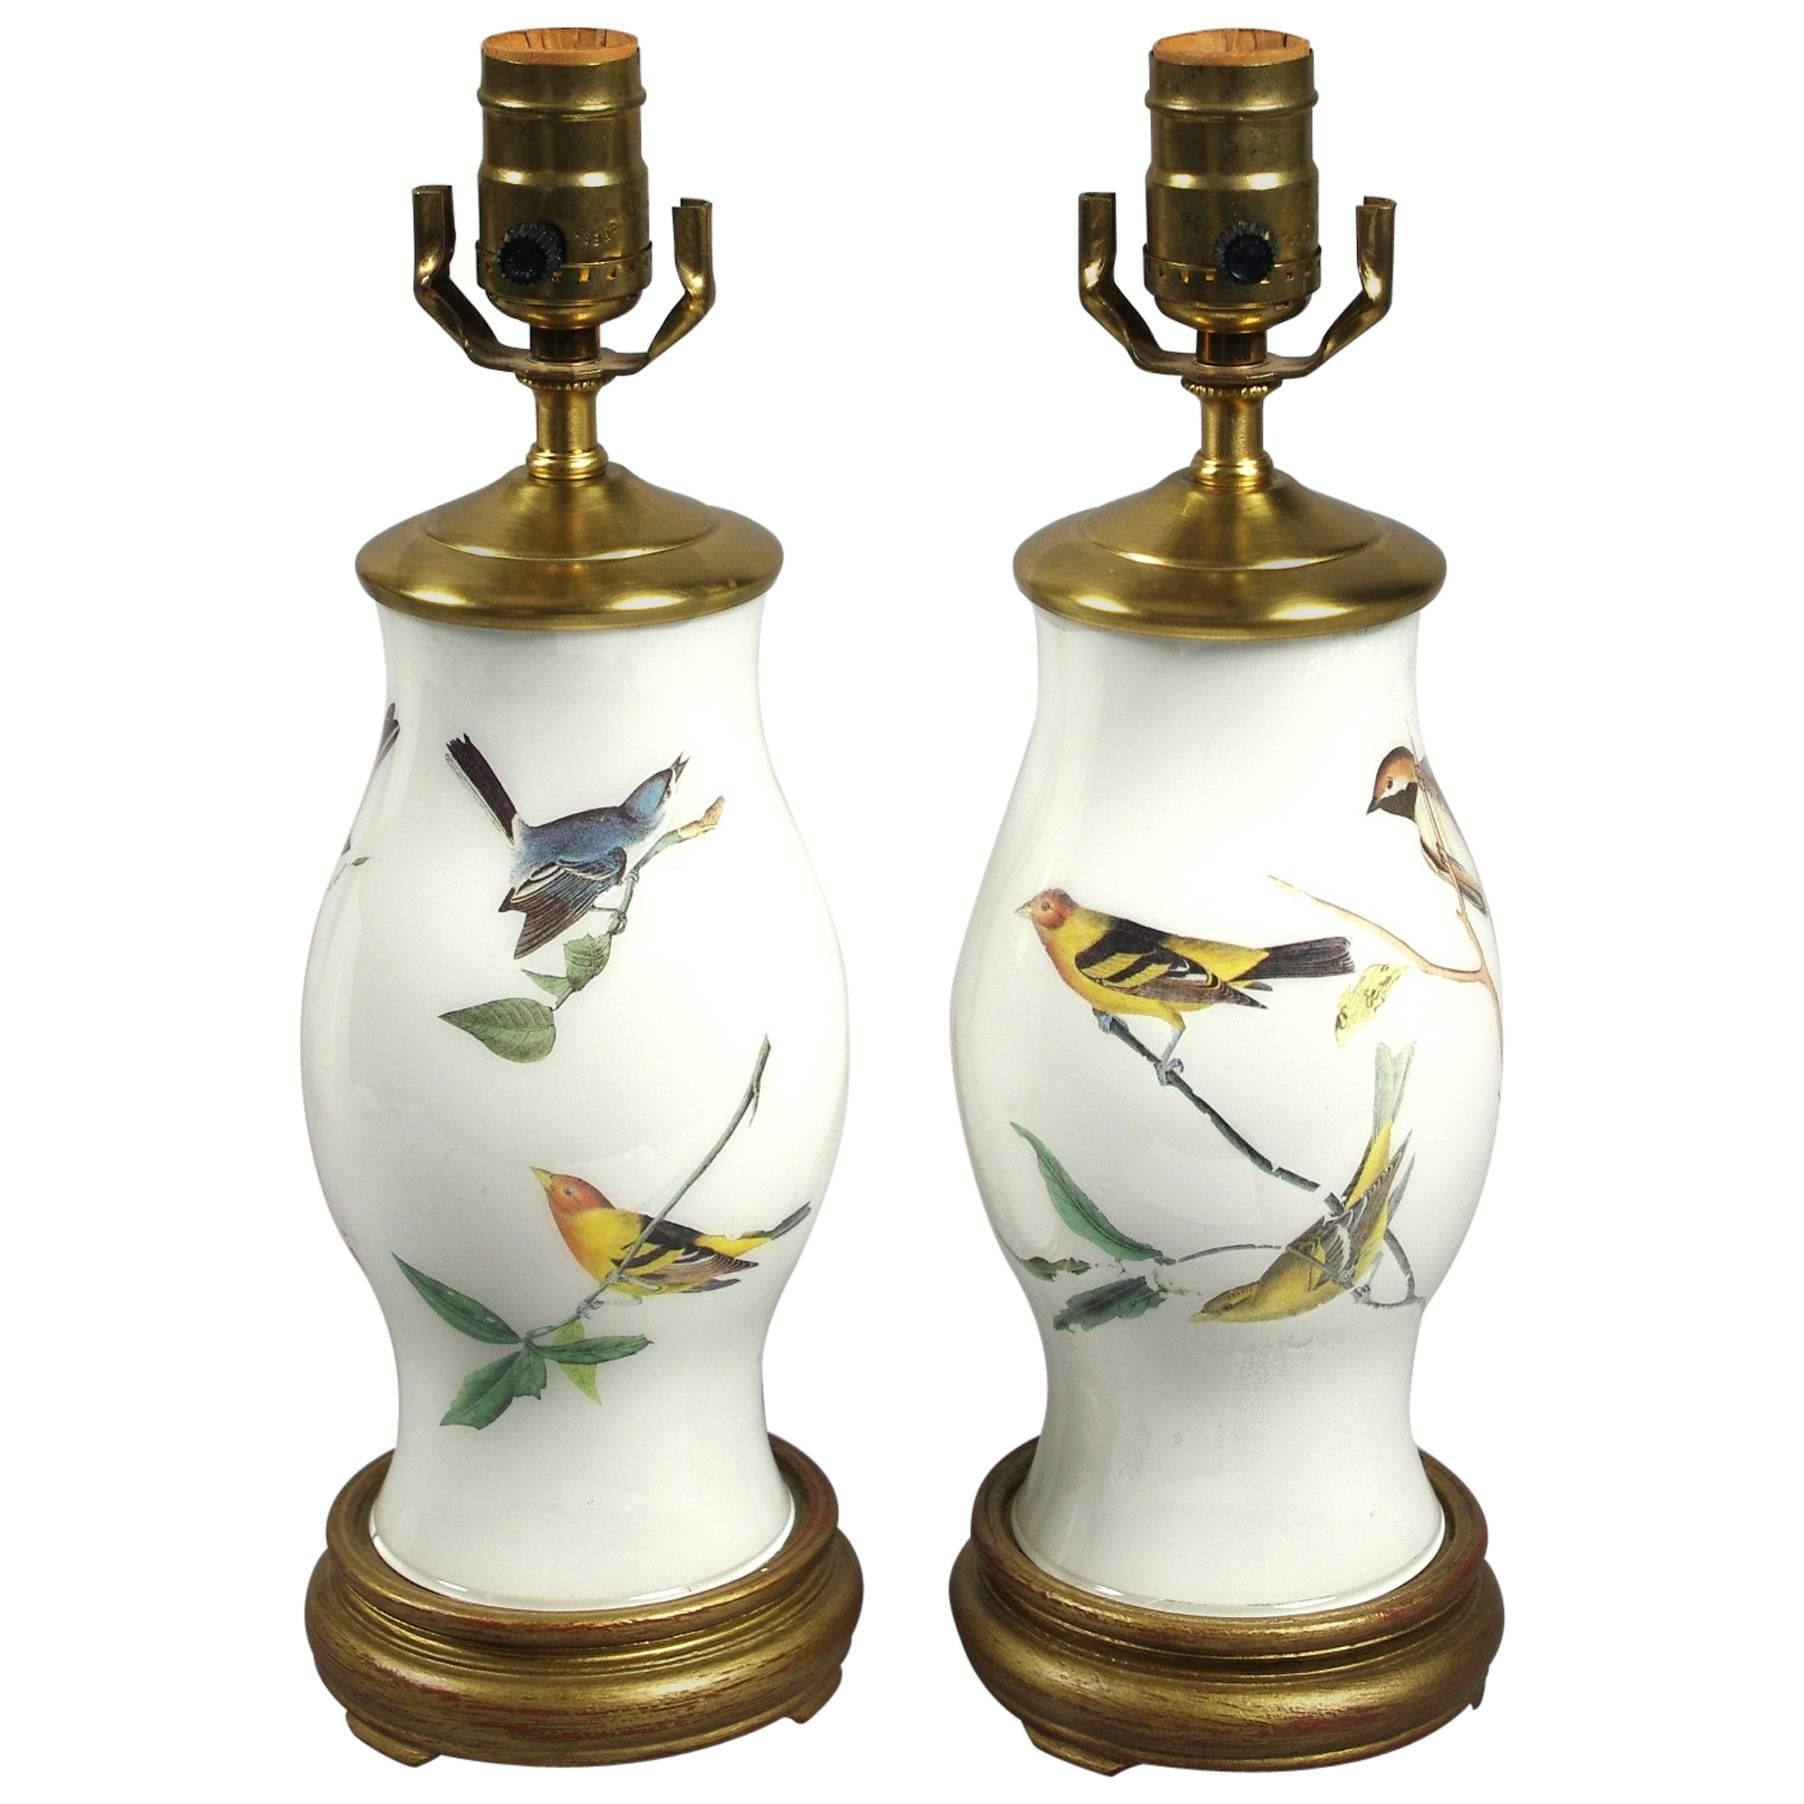 Delightful Pair of Small Decalcomania Lamps